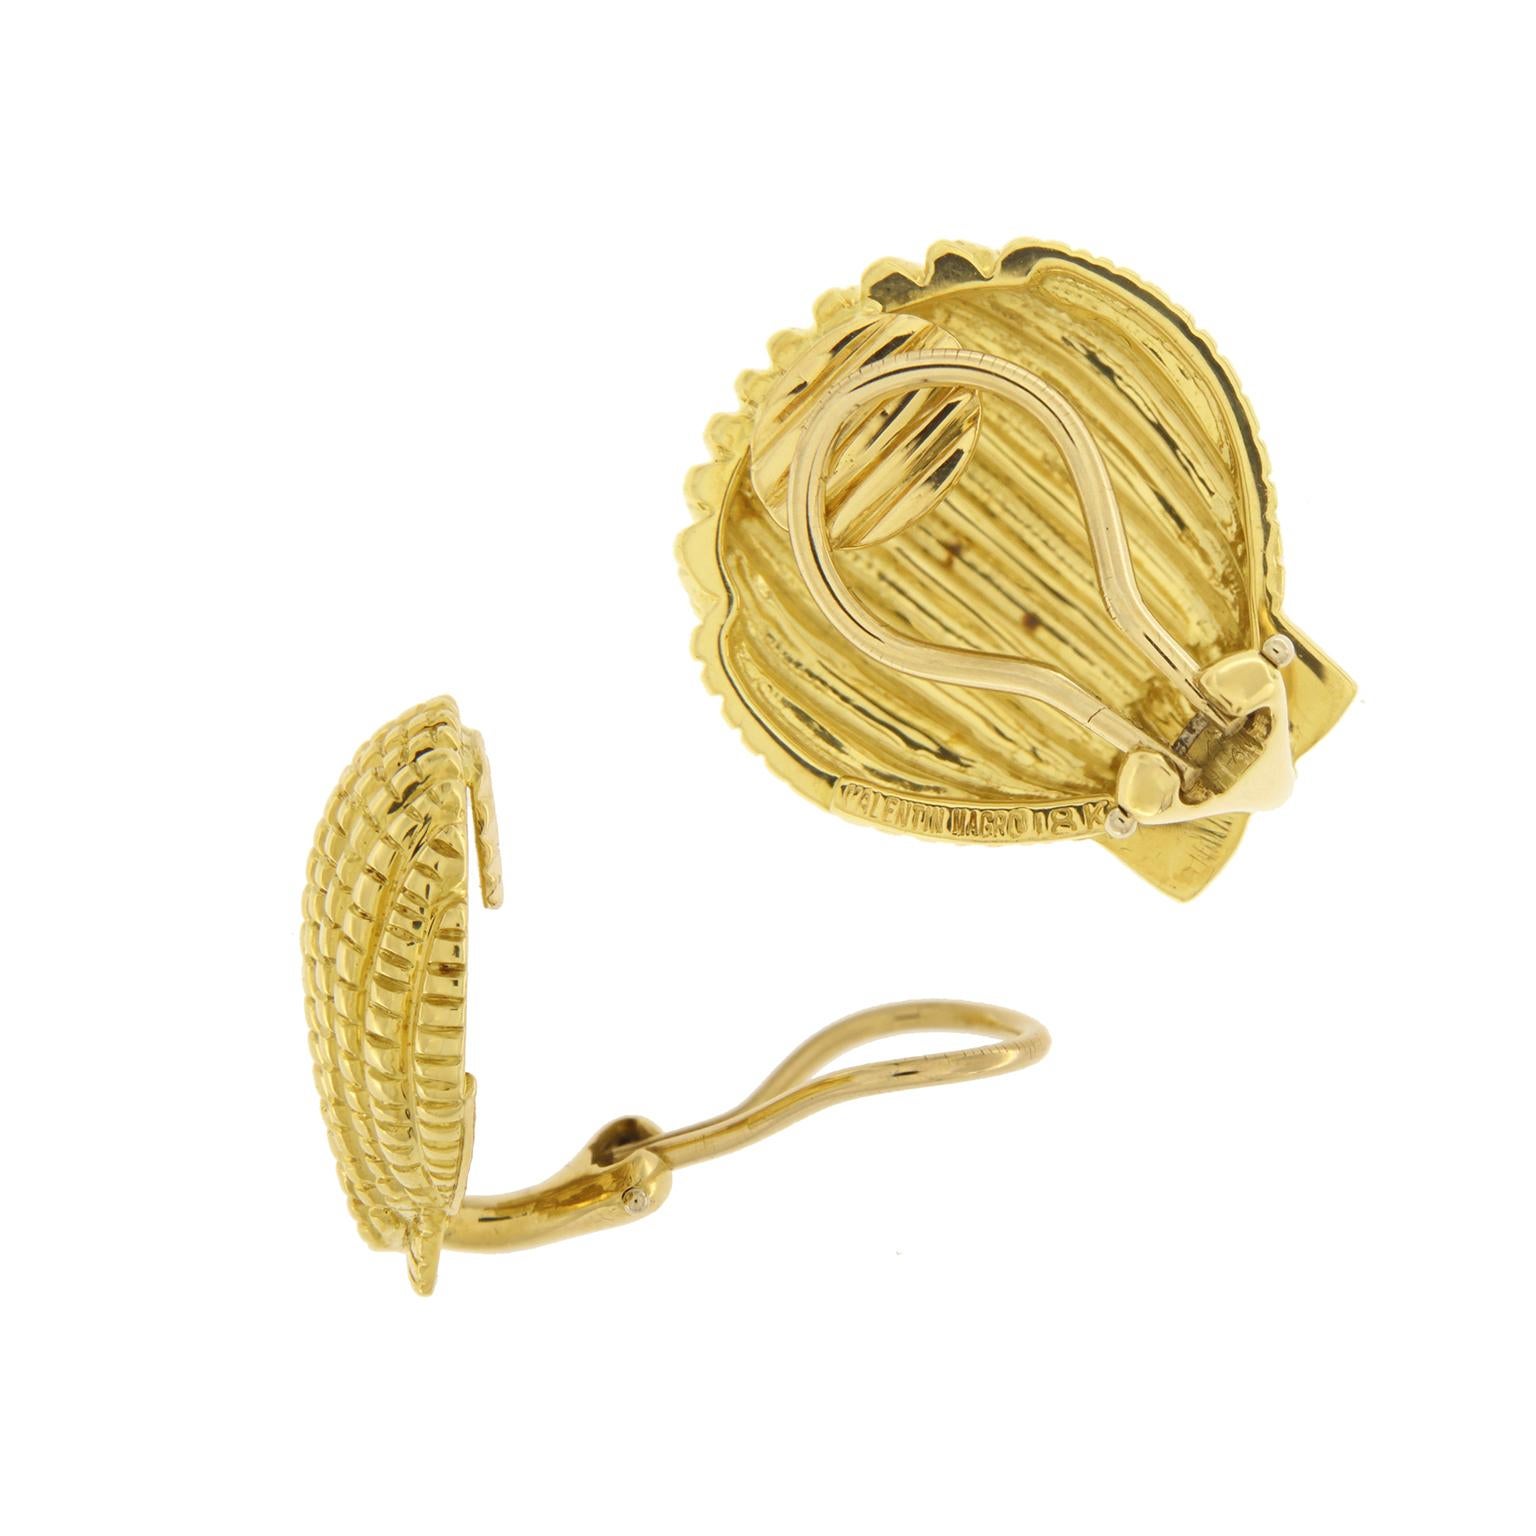 Gold depicts a marine theme for these earrings. A scallop shell is formed with a base of polished 18k yellow gold with soft ridges to create vertical rows for definition. Indentations across the rows, as well as the triangular shapes at the tapered